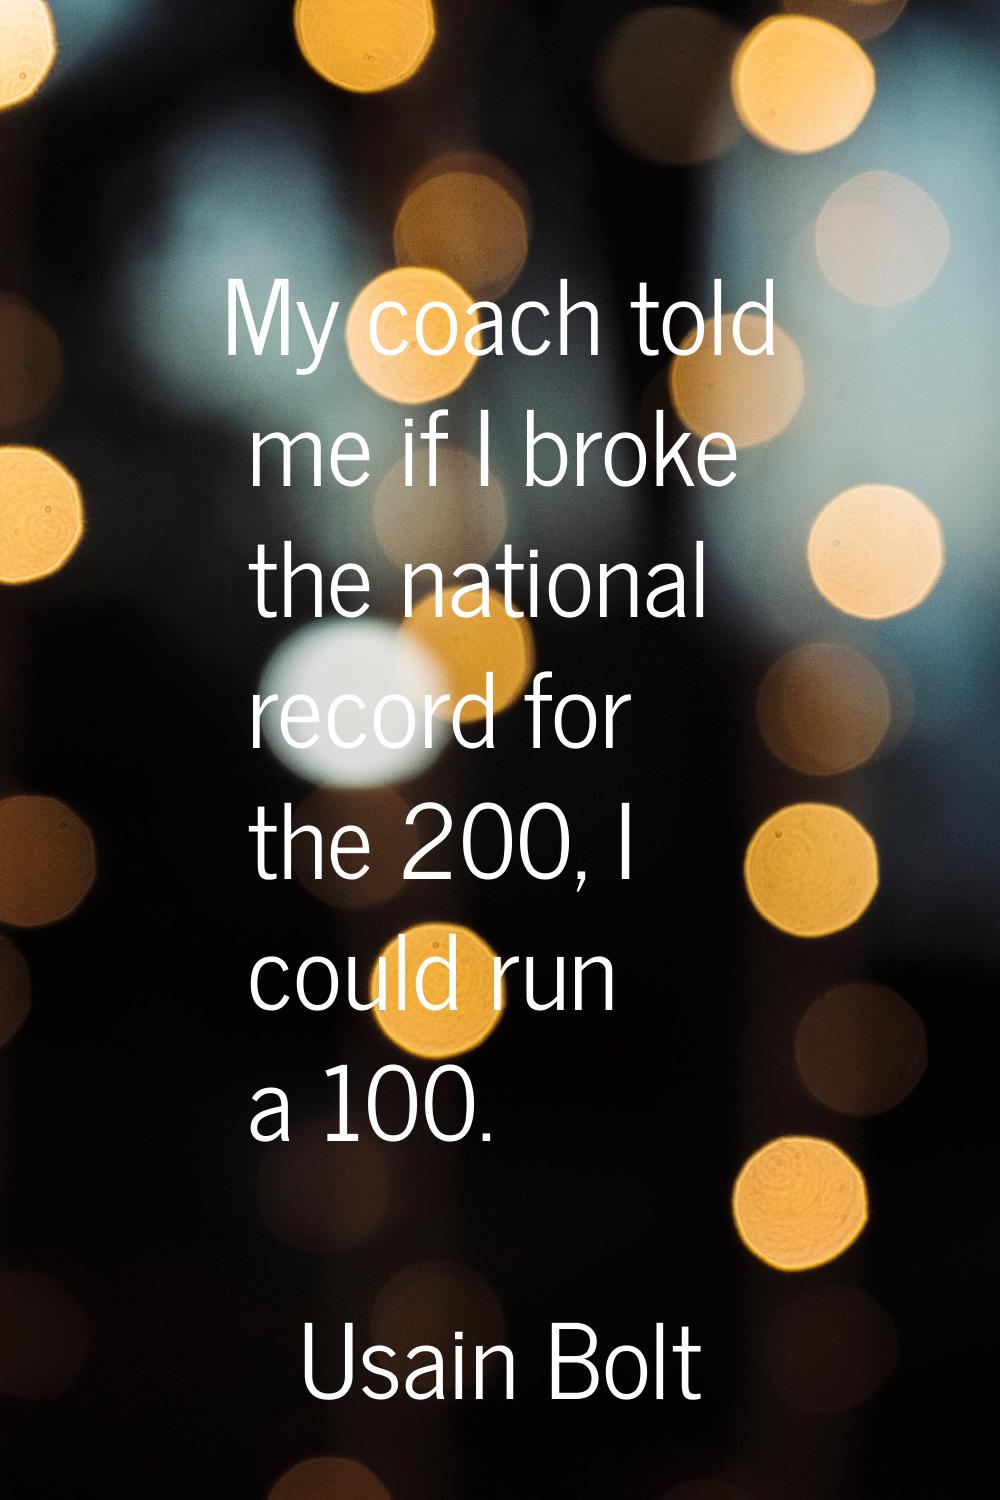 My coach told me if I broke the national record for the 200, I could run a 100.